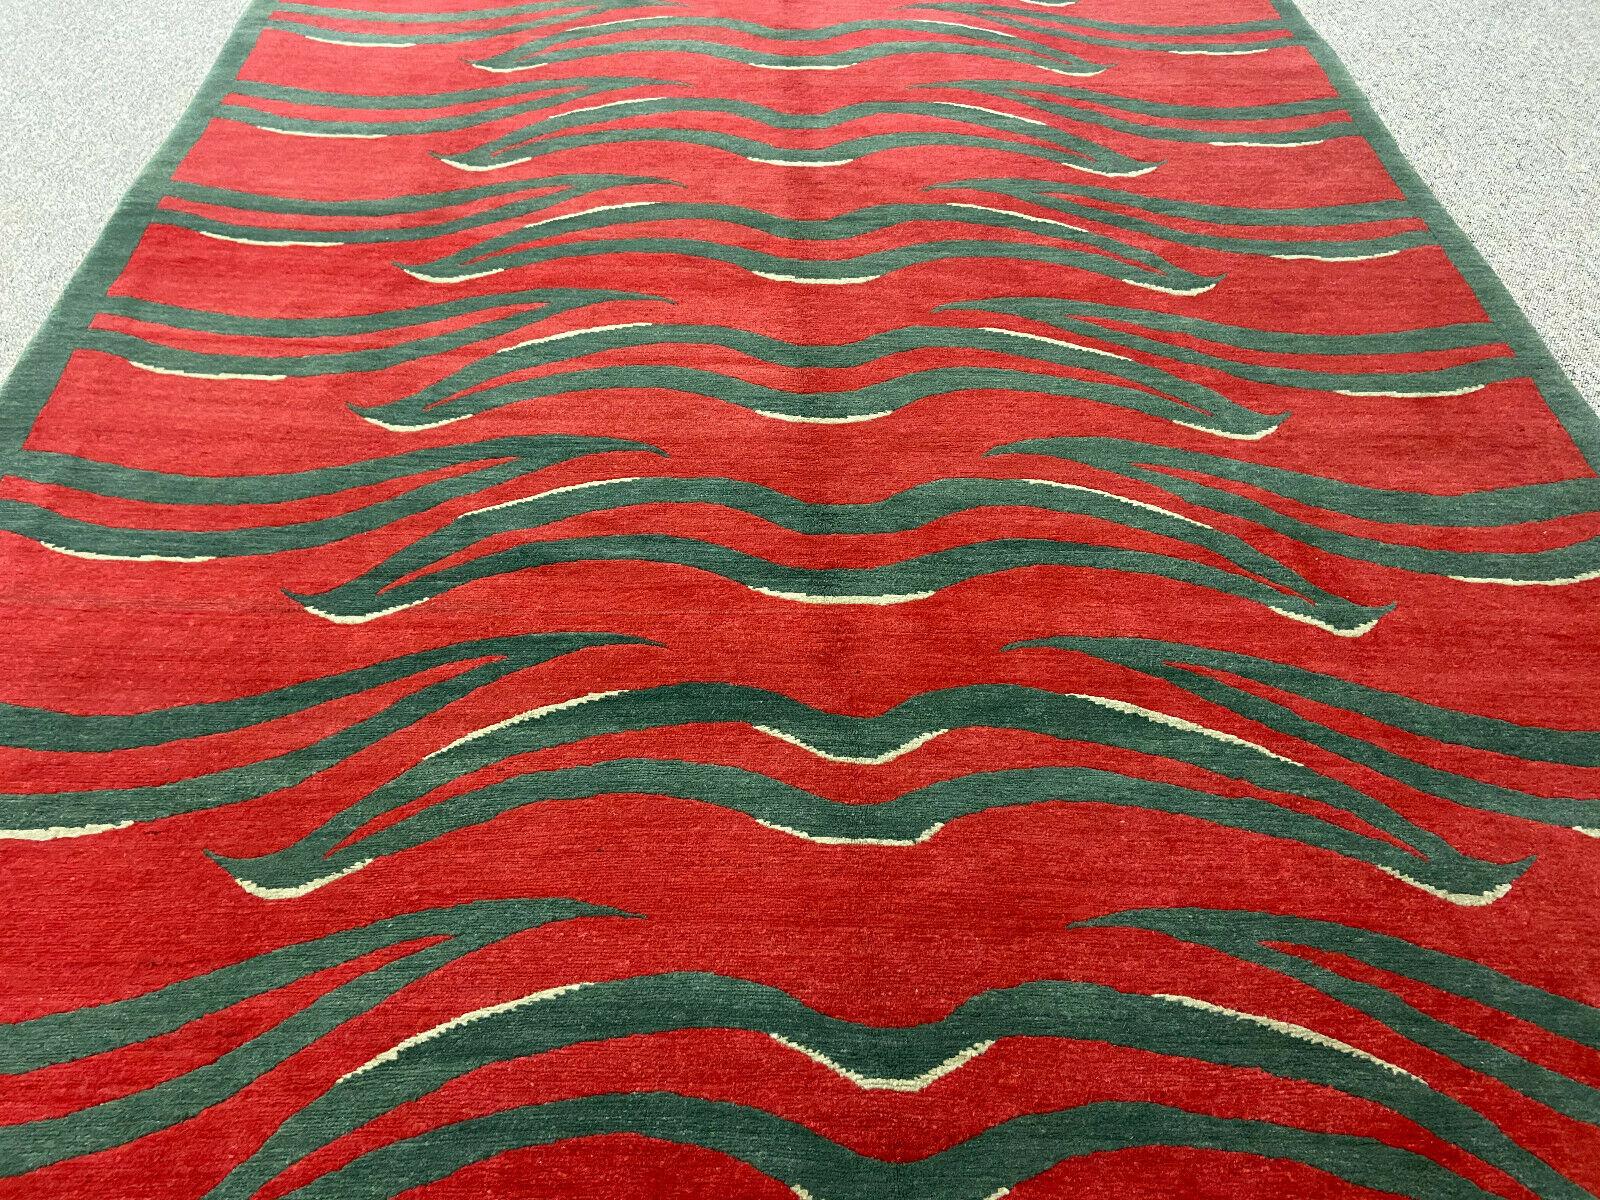 Contemporary Tibetan Tiger Rug Pure Wool Hand Knotted Red Green by Djoharian Collection For Sale